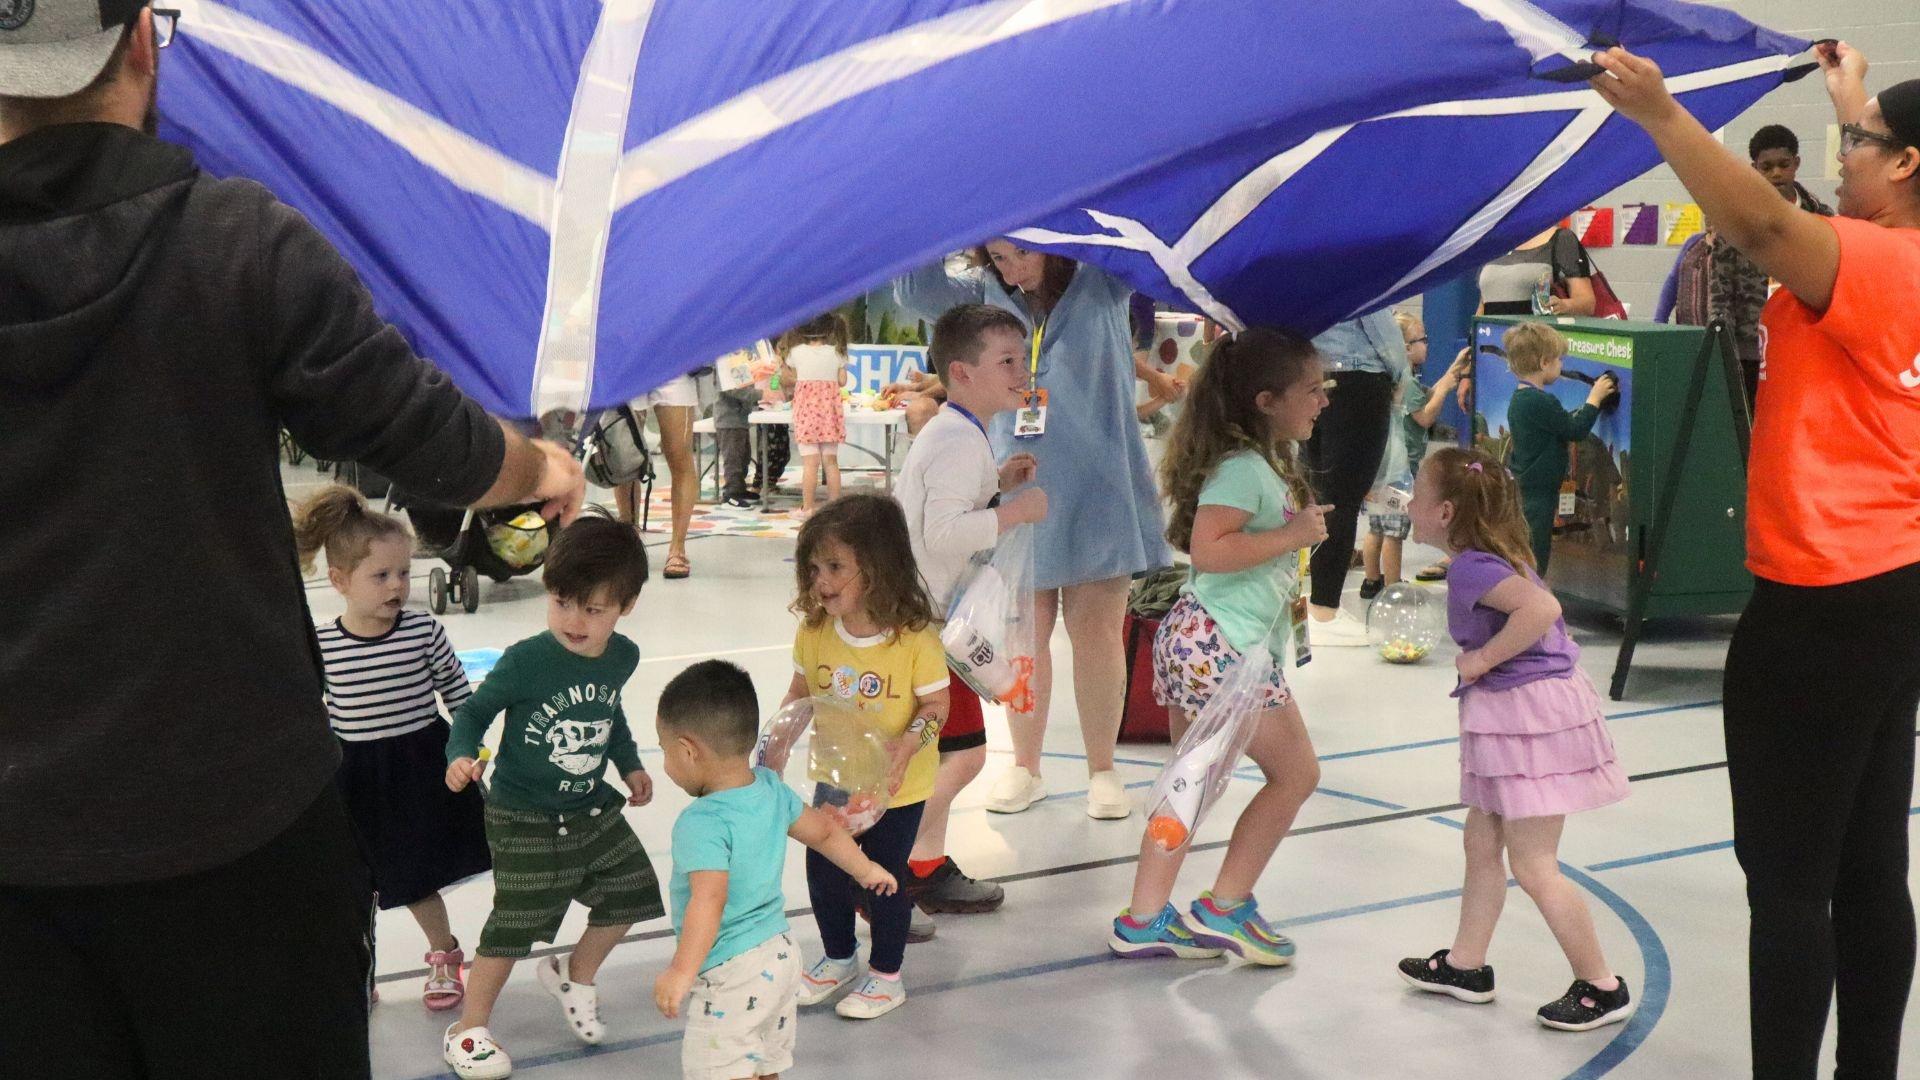 Kids run around under a parachute at a Rootle Roadster Tour stop.